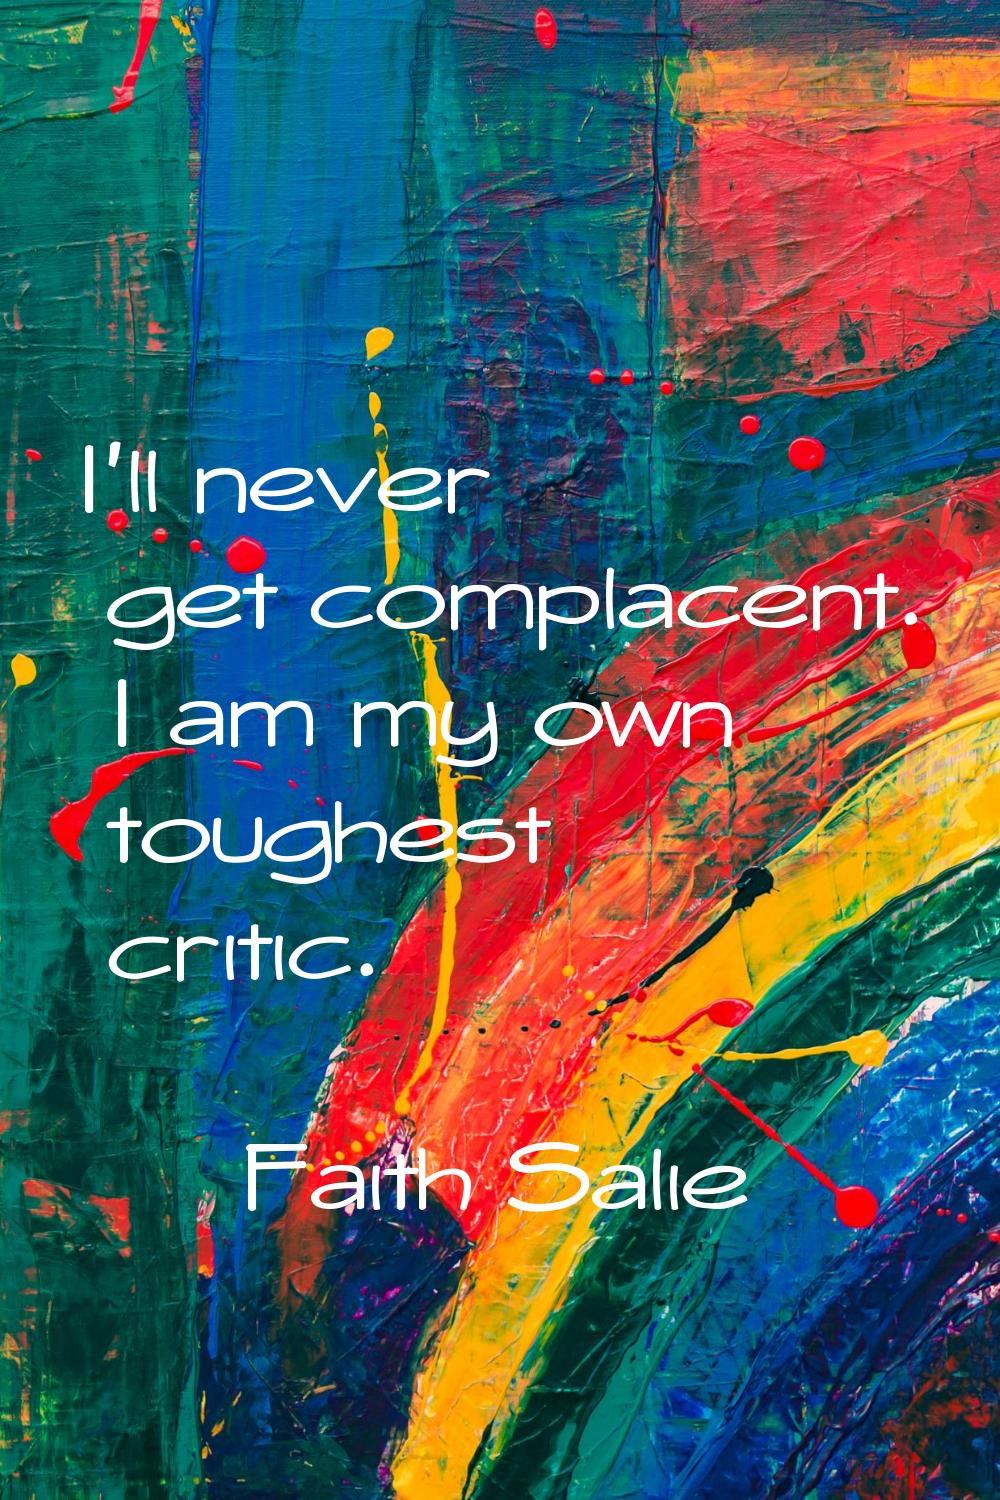 I'll never get complacent. I am my own toughest critic.